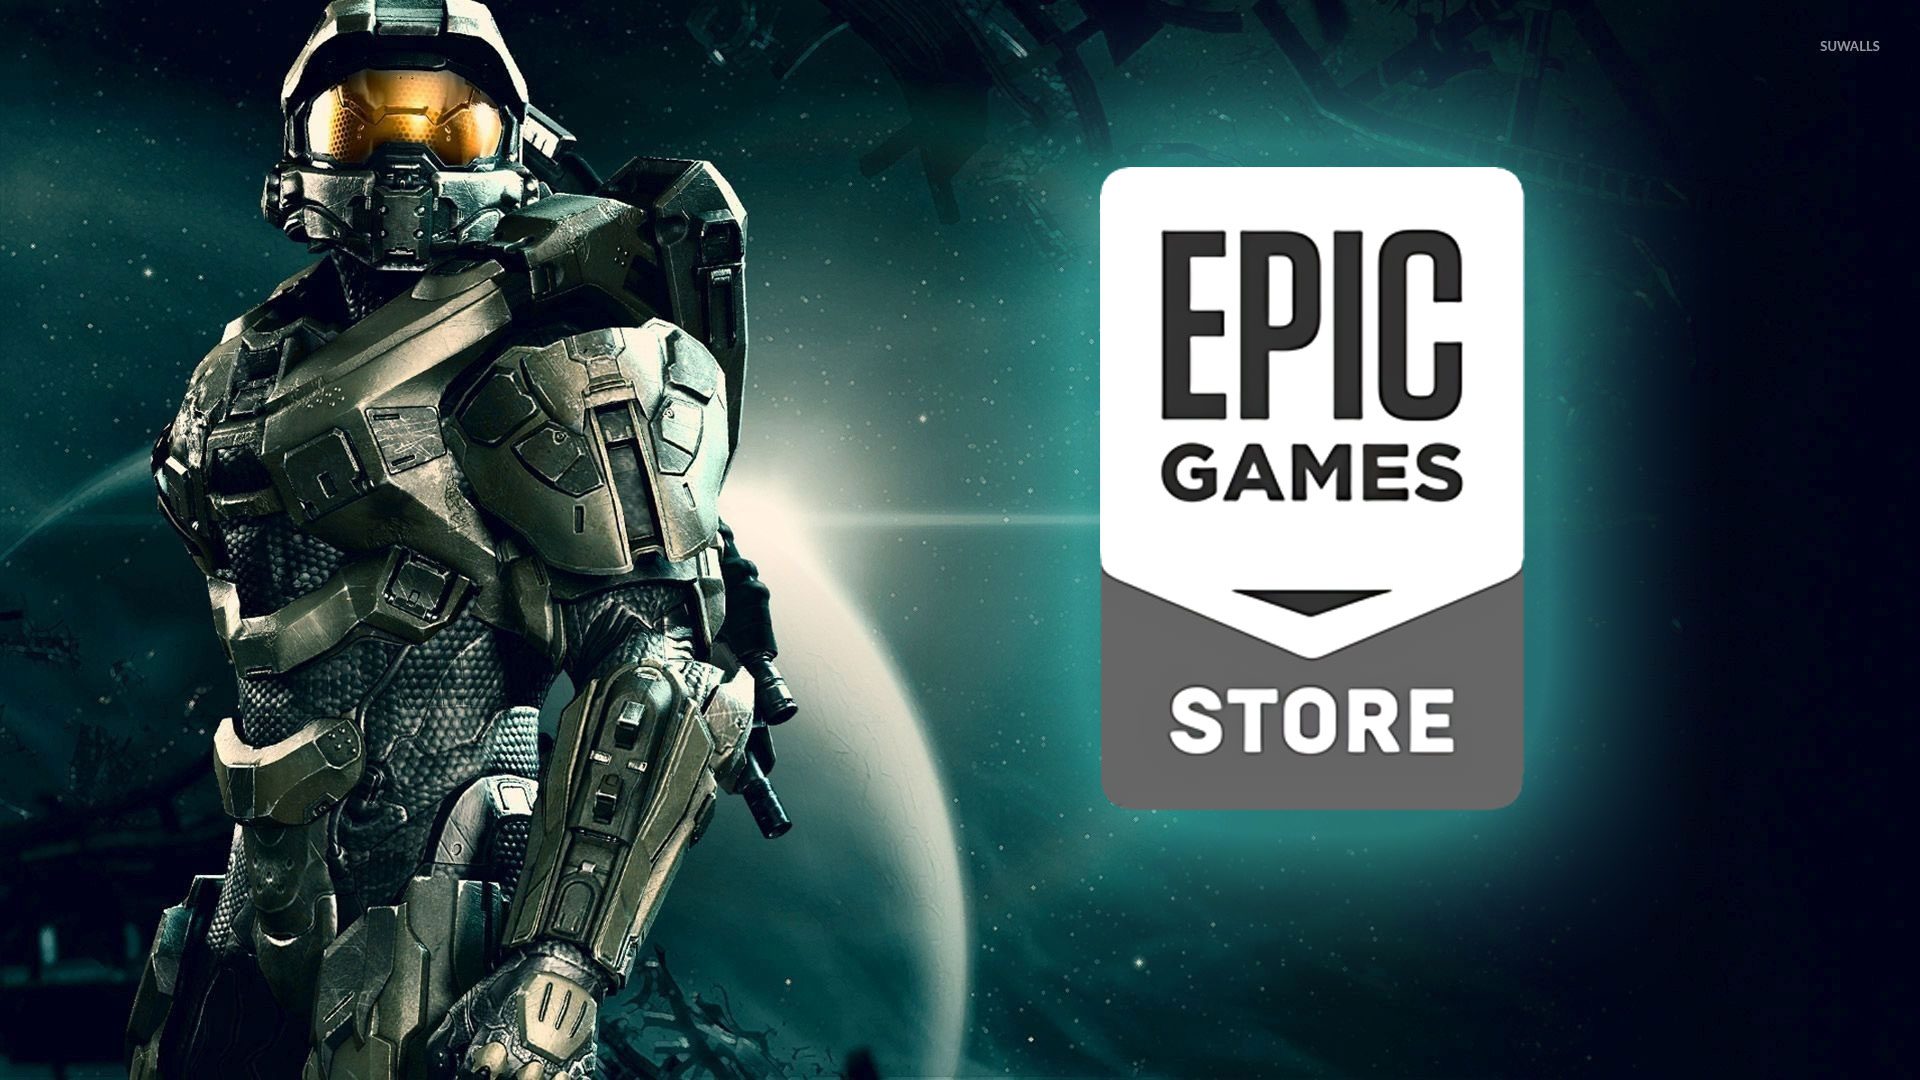 halo master chief collection xbox store